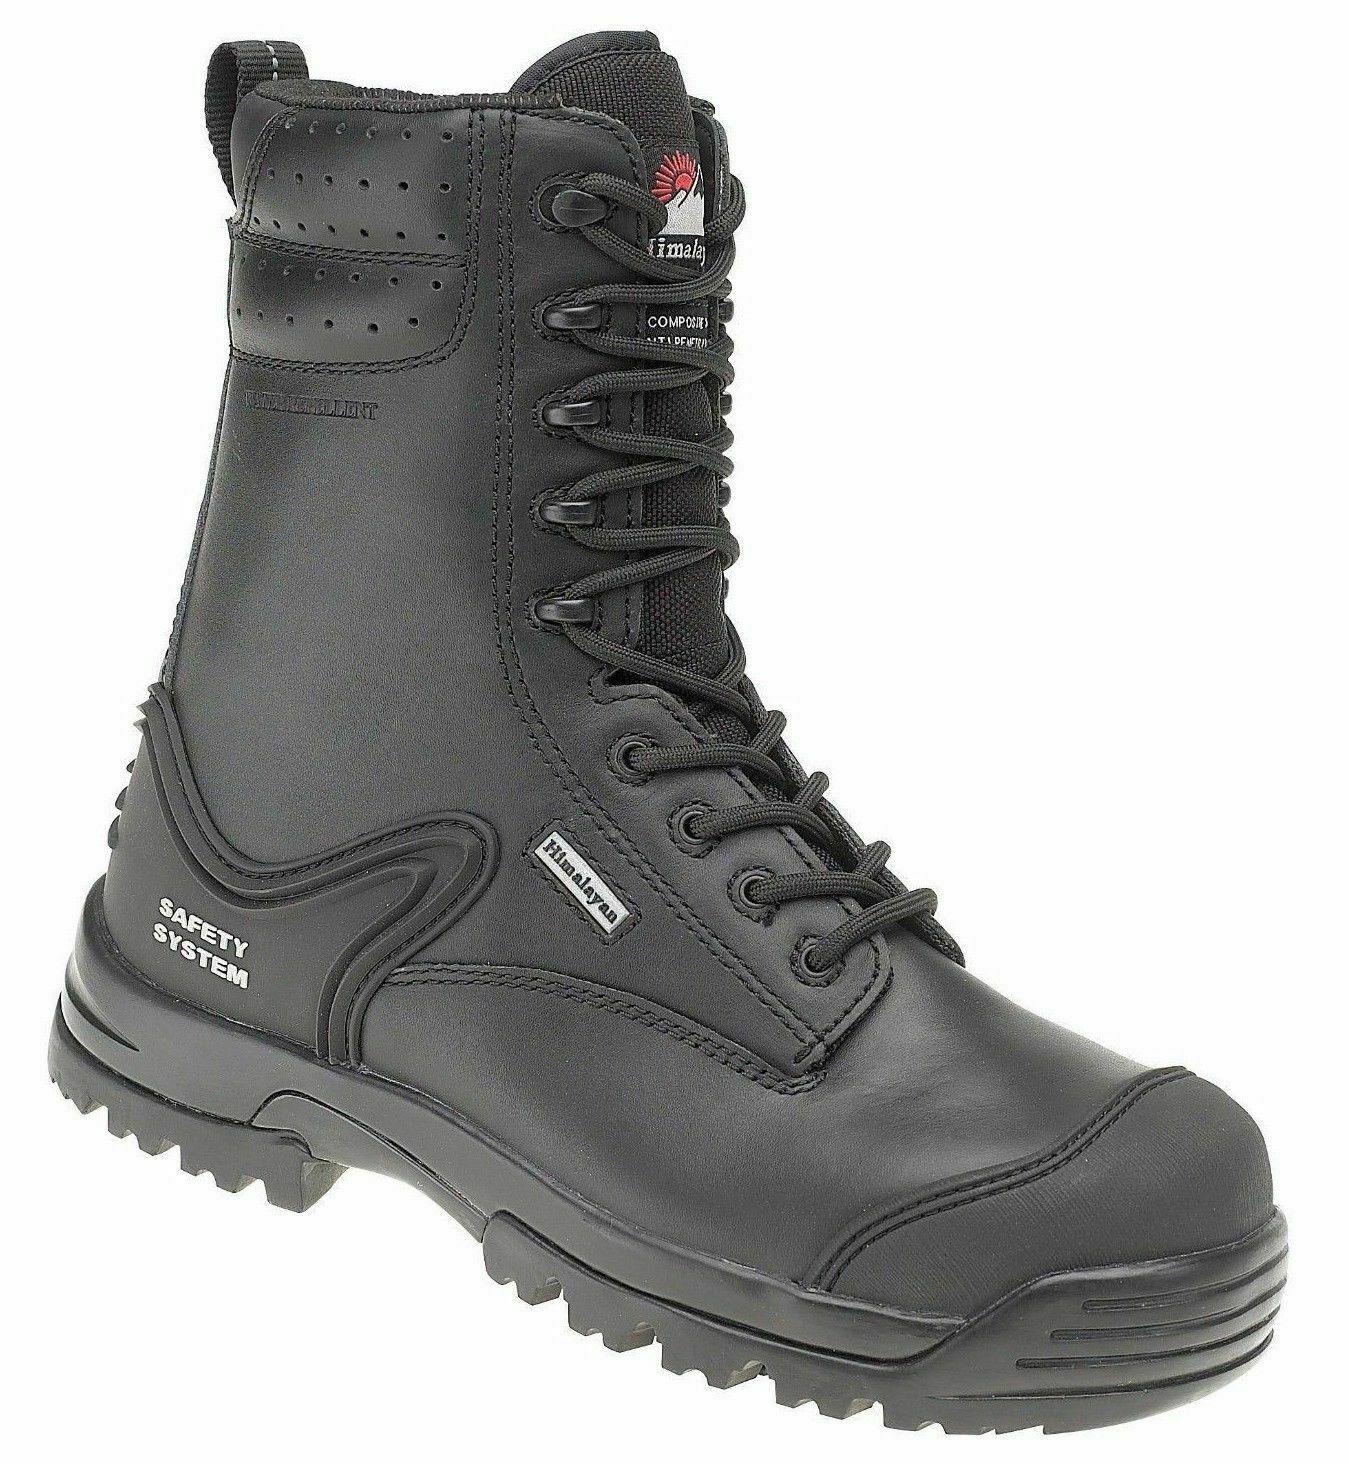 Himalayan S3 black leather composite toe/midsole combat safety boot #5204